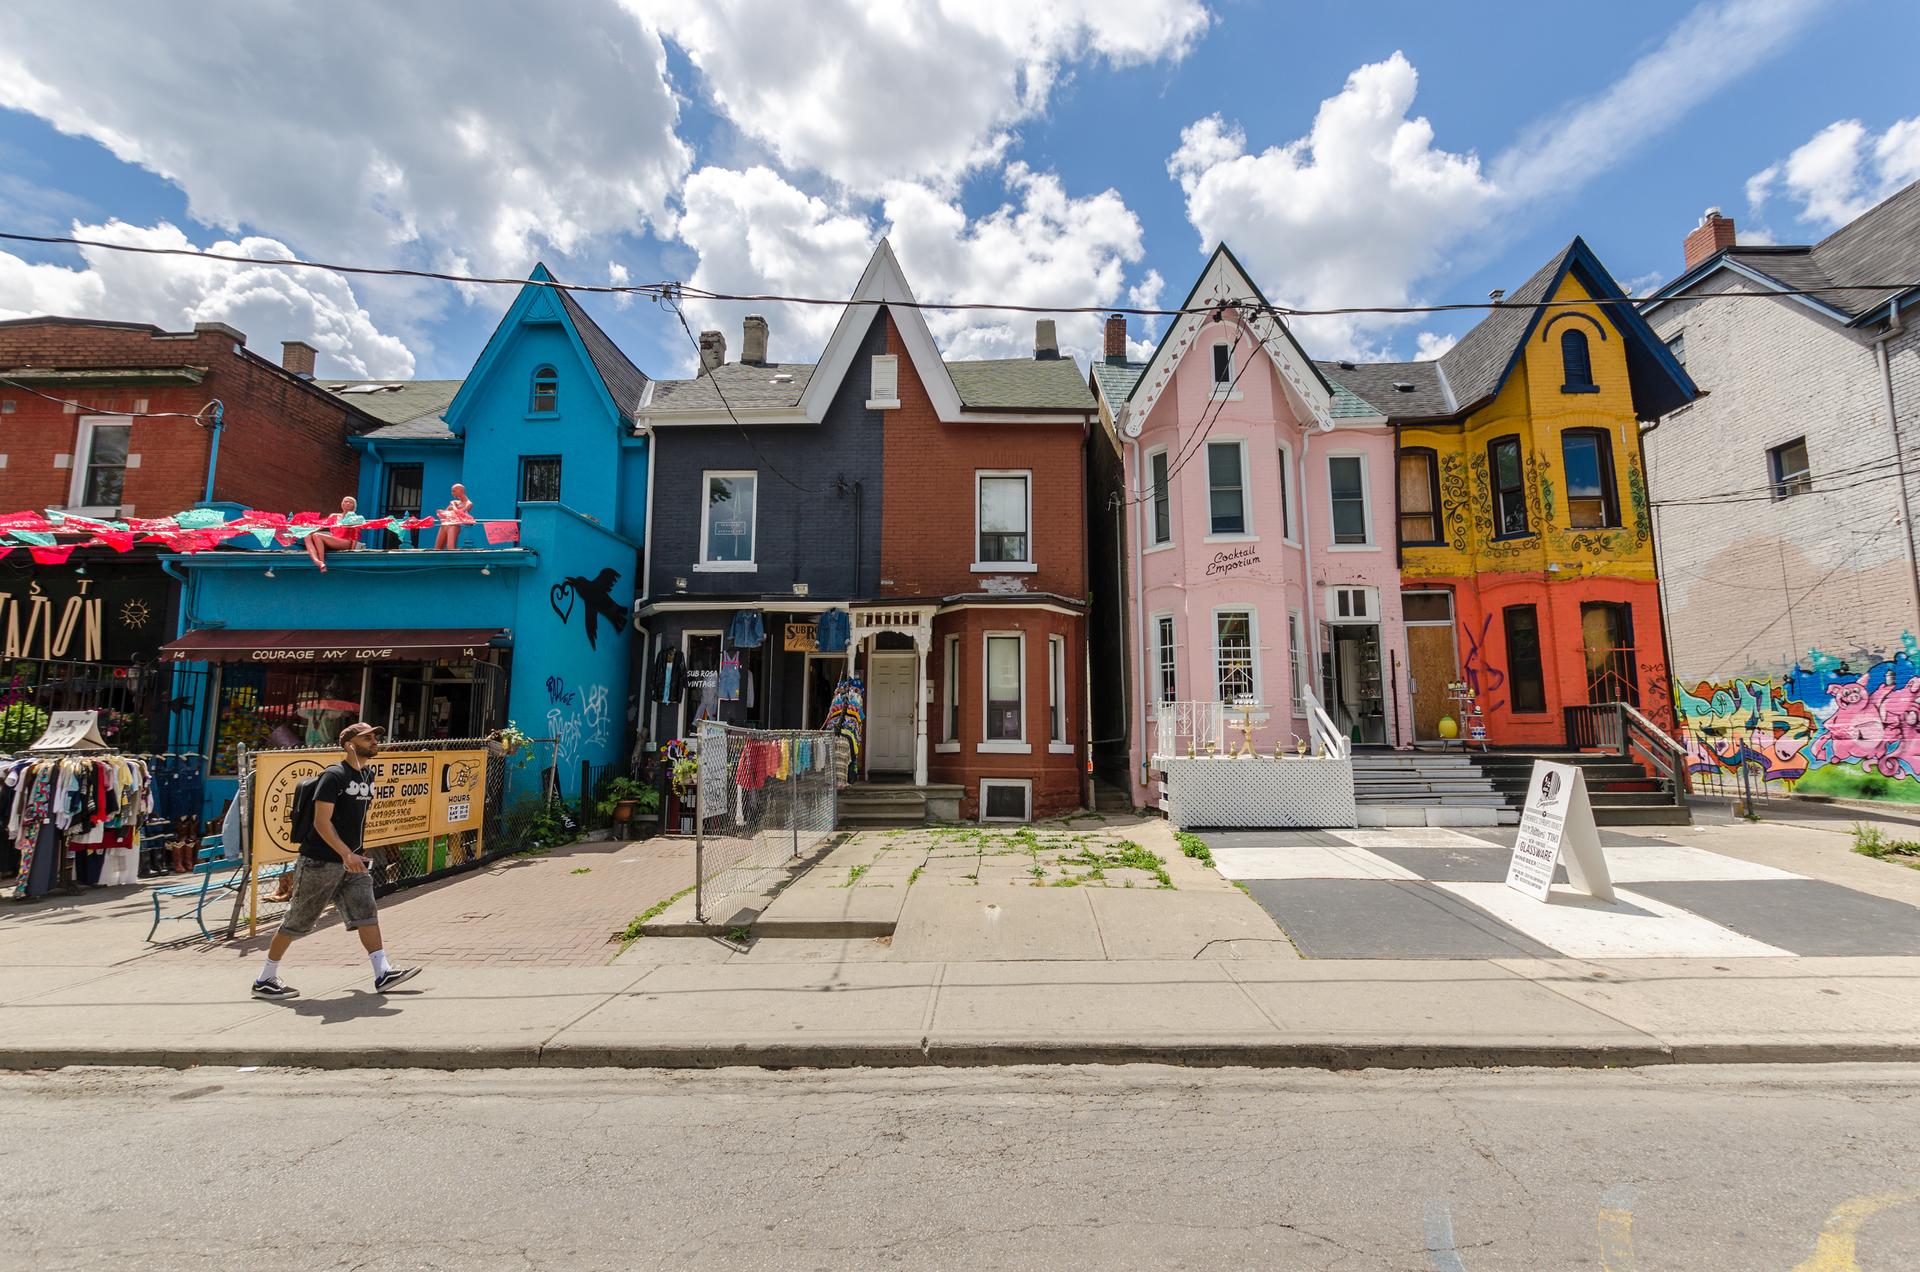 Developing mixed use and mixed income neighbourhoods will help cities recover after the pandemic. 